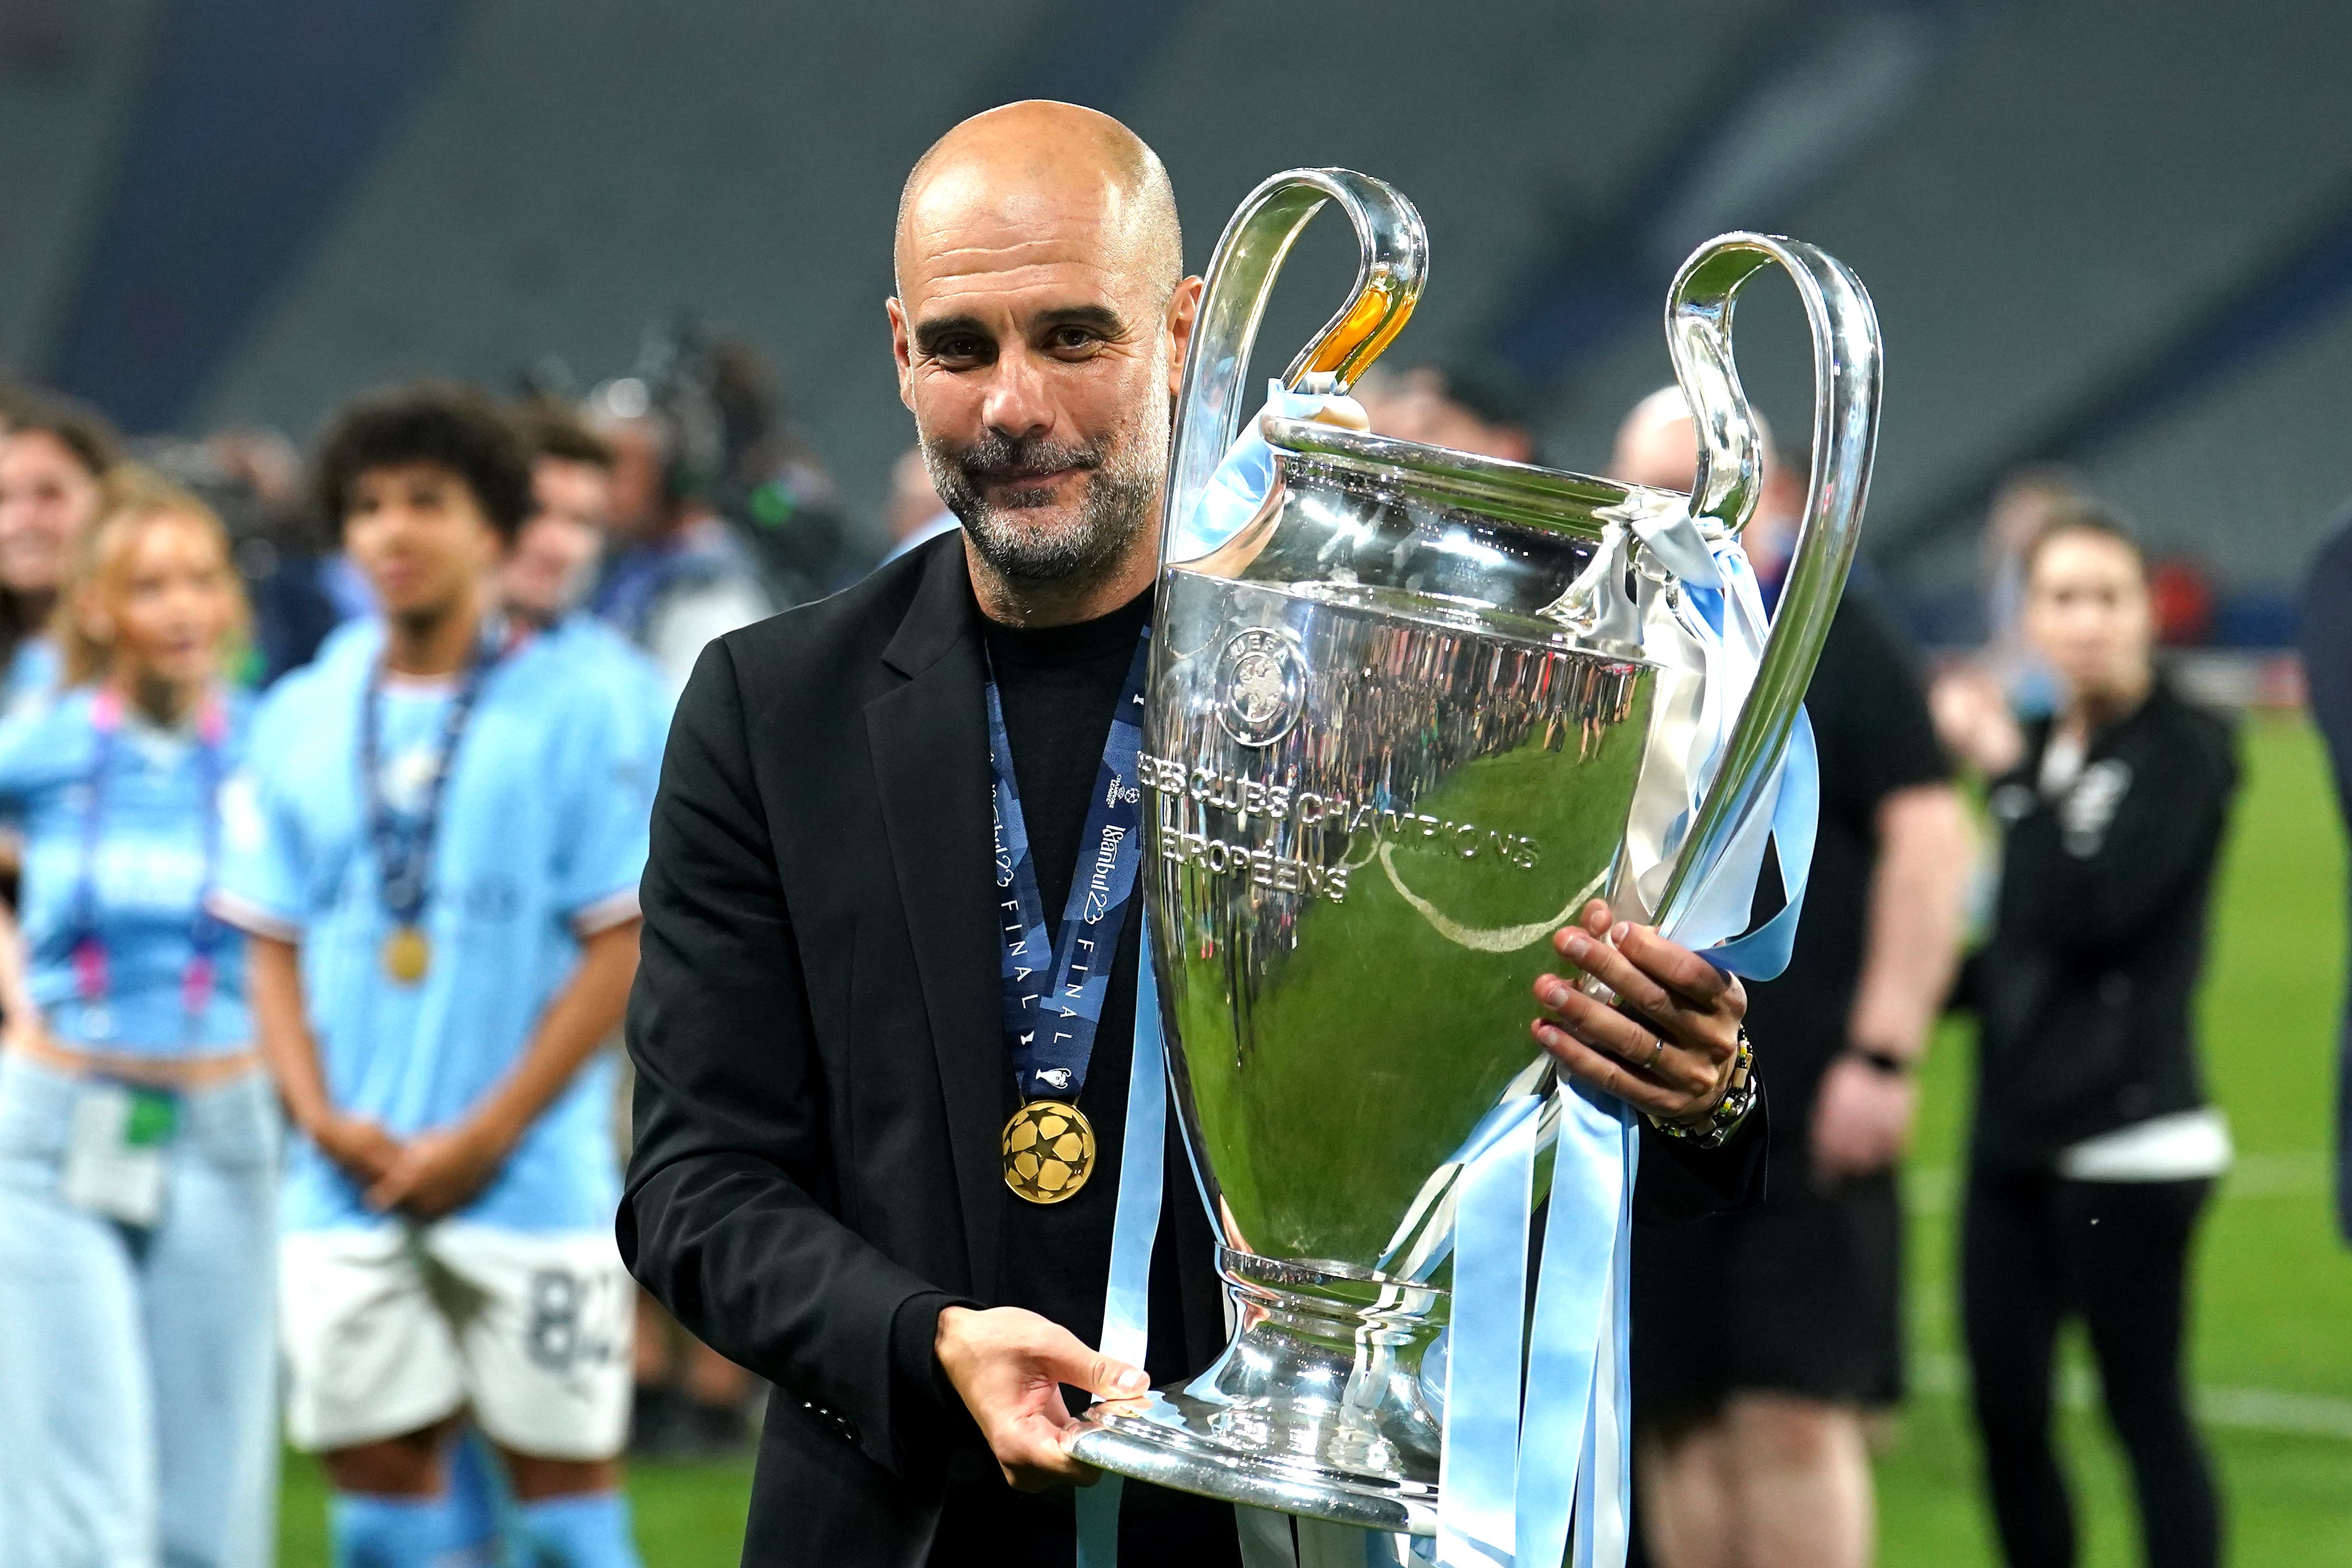 Pep Guardiola emotional as Manchester City win Champions League to seal treble | The Independent